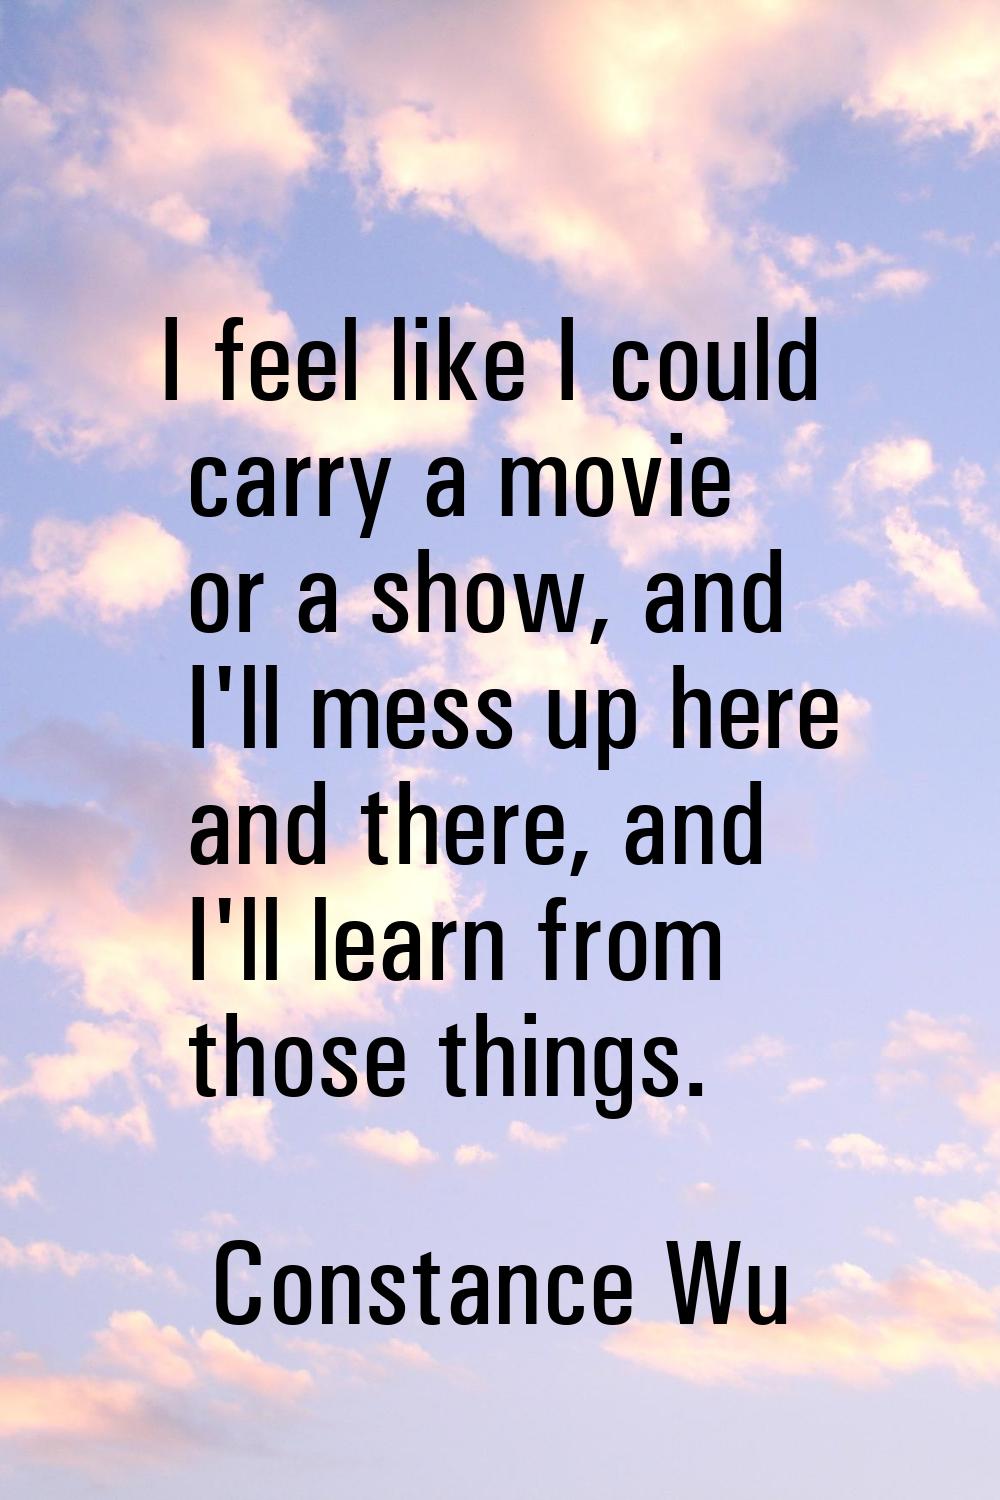 I feel like I could carry a movie or a show, and I'll mess up here and there, and I'll learn from t